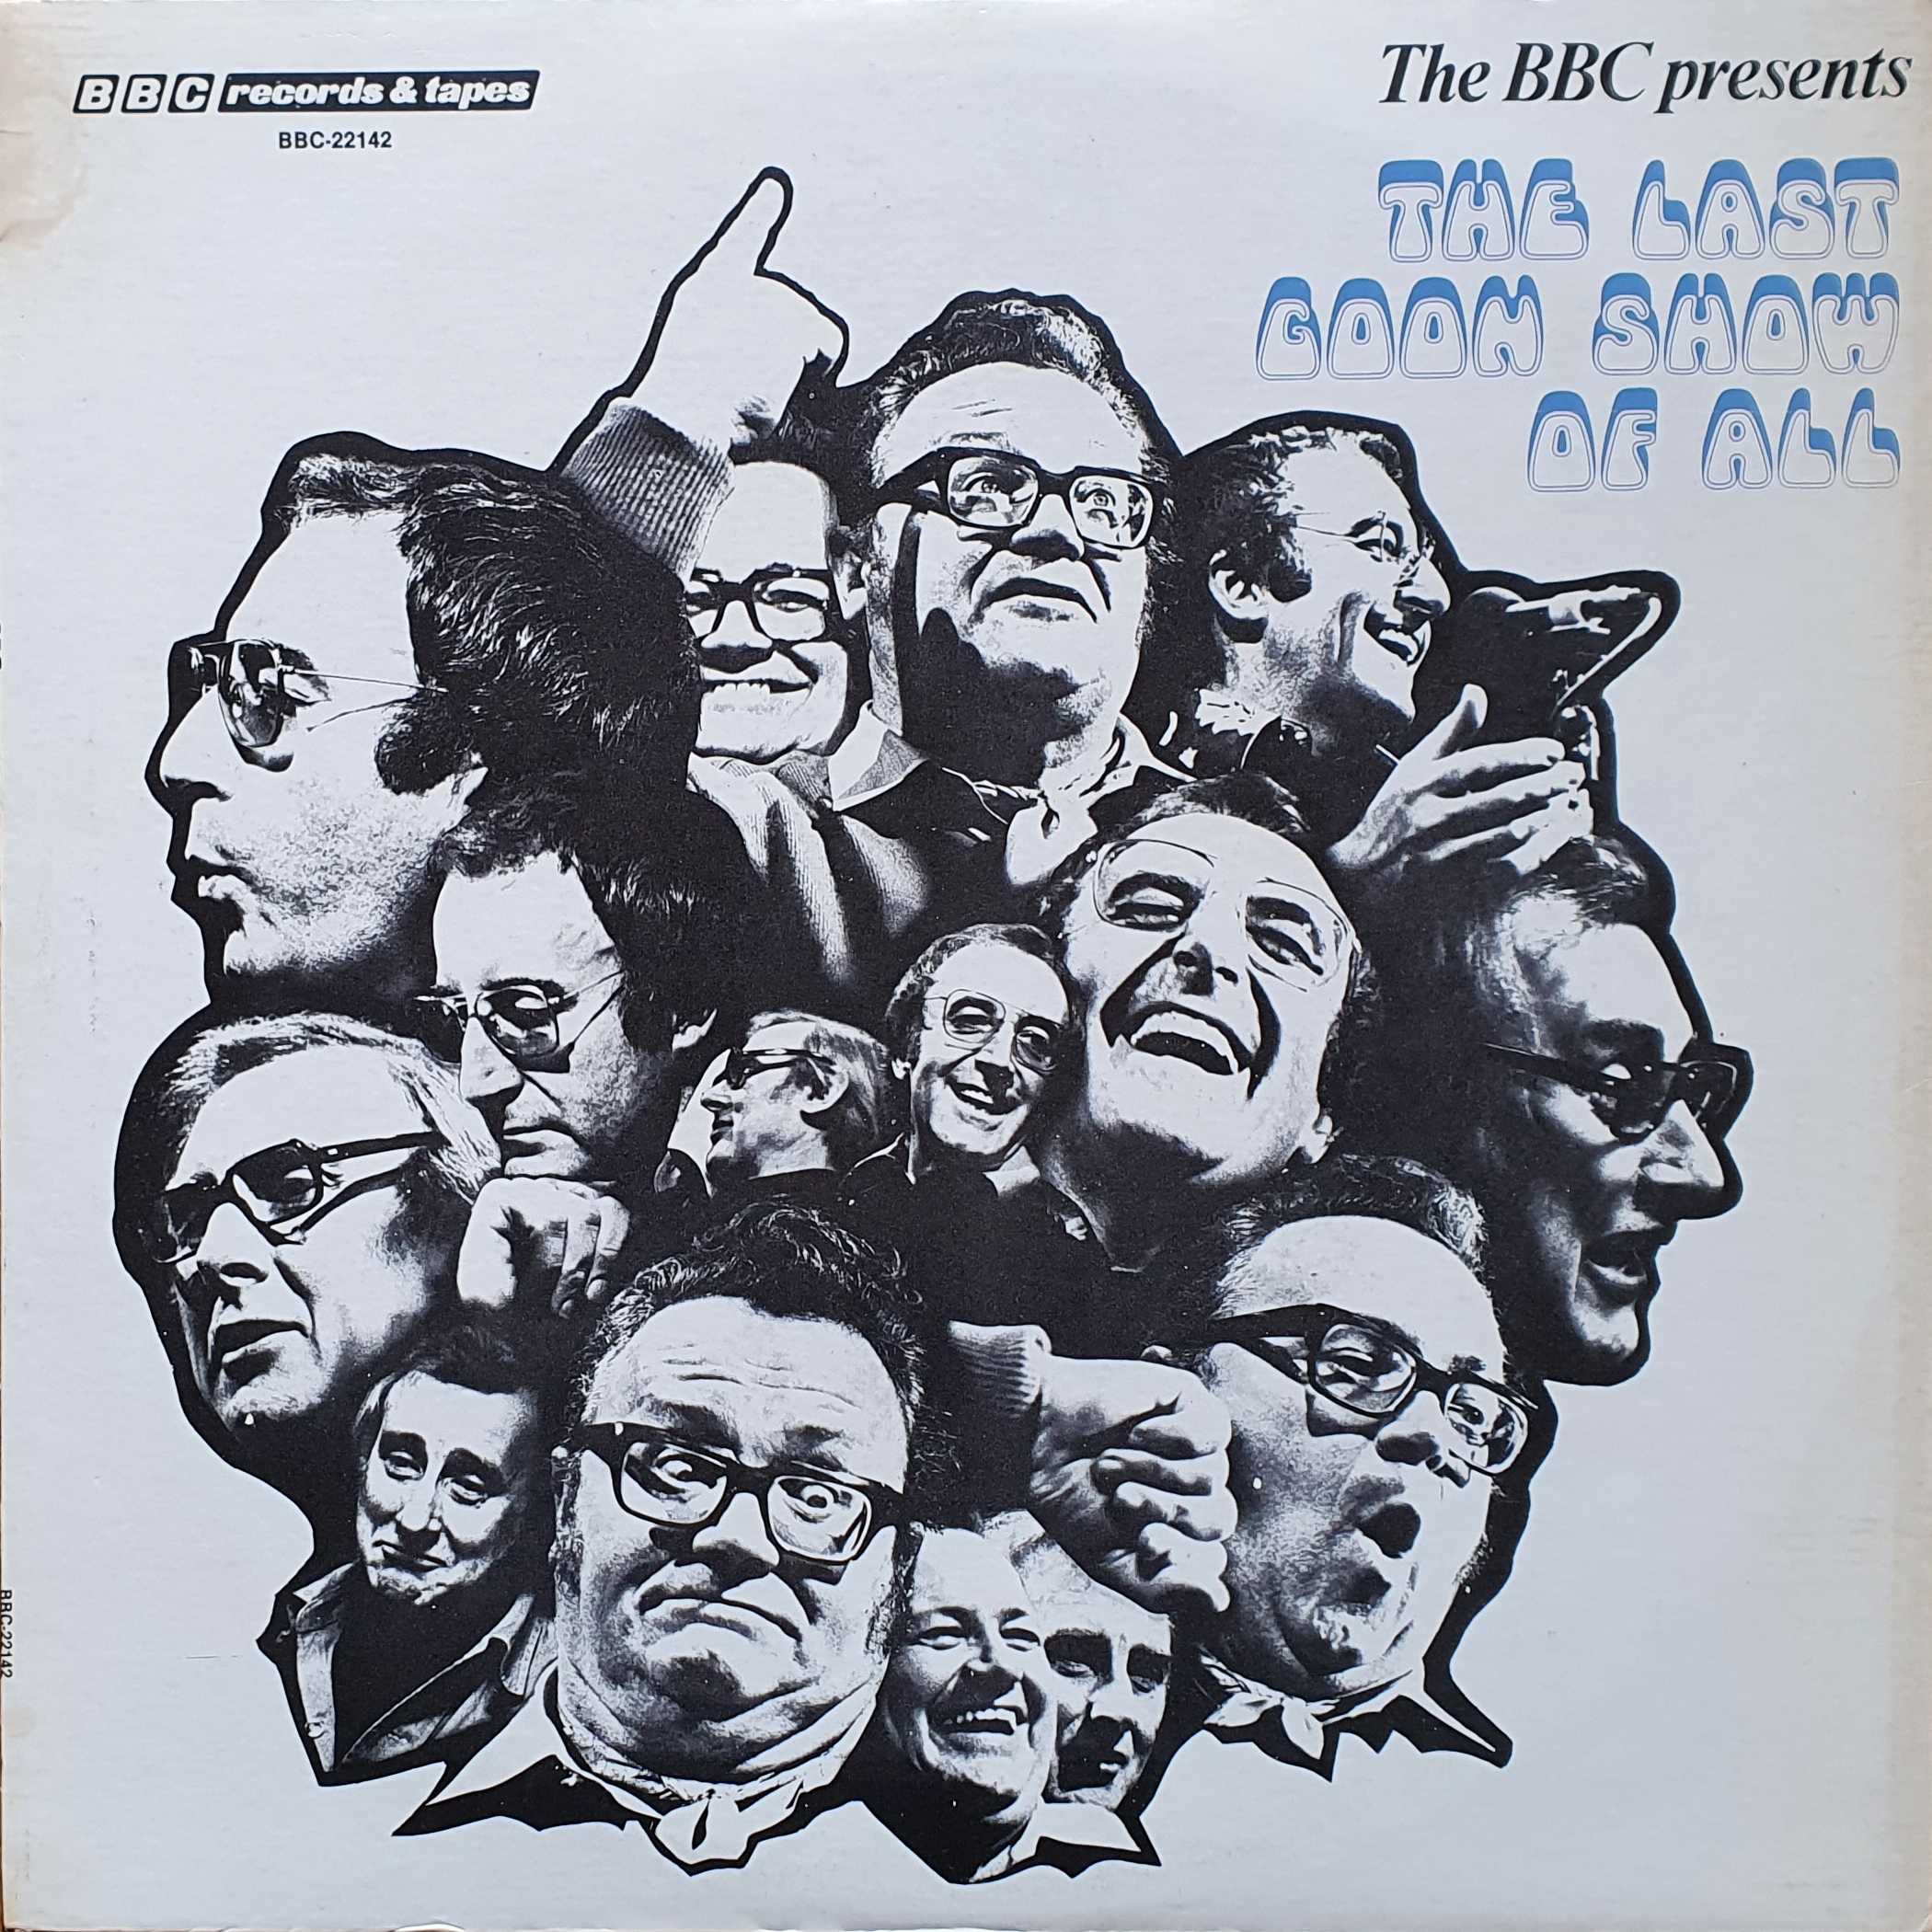 Picture of BBC - 22142 The last Goon show of all (US import) by artist Spike Milligan from the BBC albums - Records and Tapes library